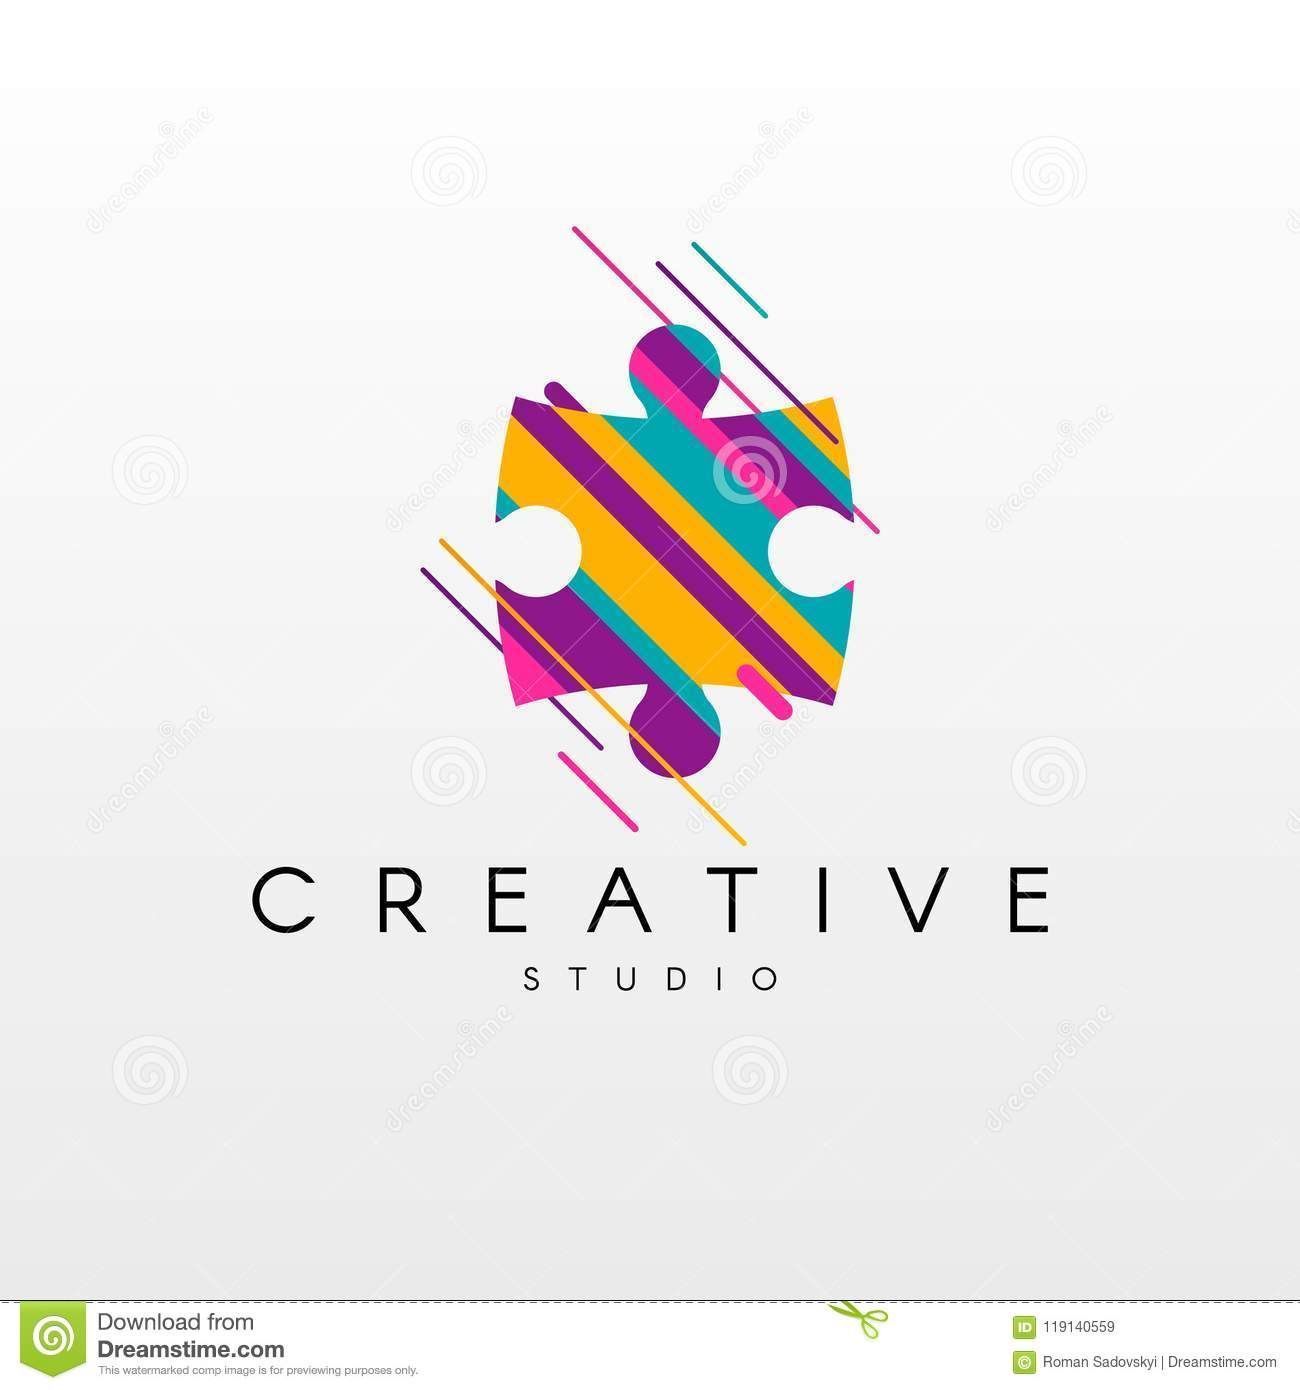 Puzzle Logo. Abstract Puzzle Logo Design, Made Of Various Geometric Shapes In Color. Stock Vector - Illustration of corporate, holding: 119140559 - Puzzle Logo. Abstract Puzzle Logo Design, Made Of Various Geometric Shapes In Color. Stock Vector - Illustration of corporate, holding: 119140559 -   12 kid fitness Logo ideas